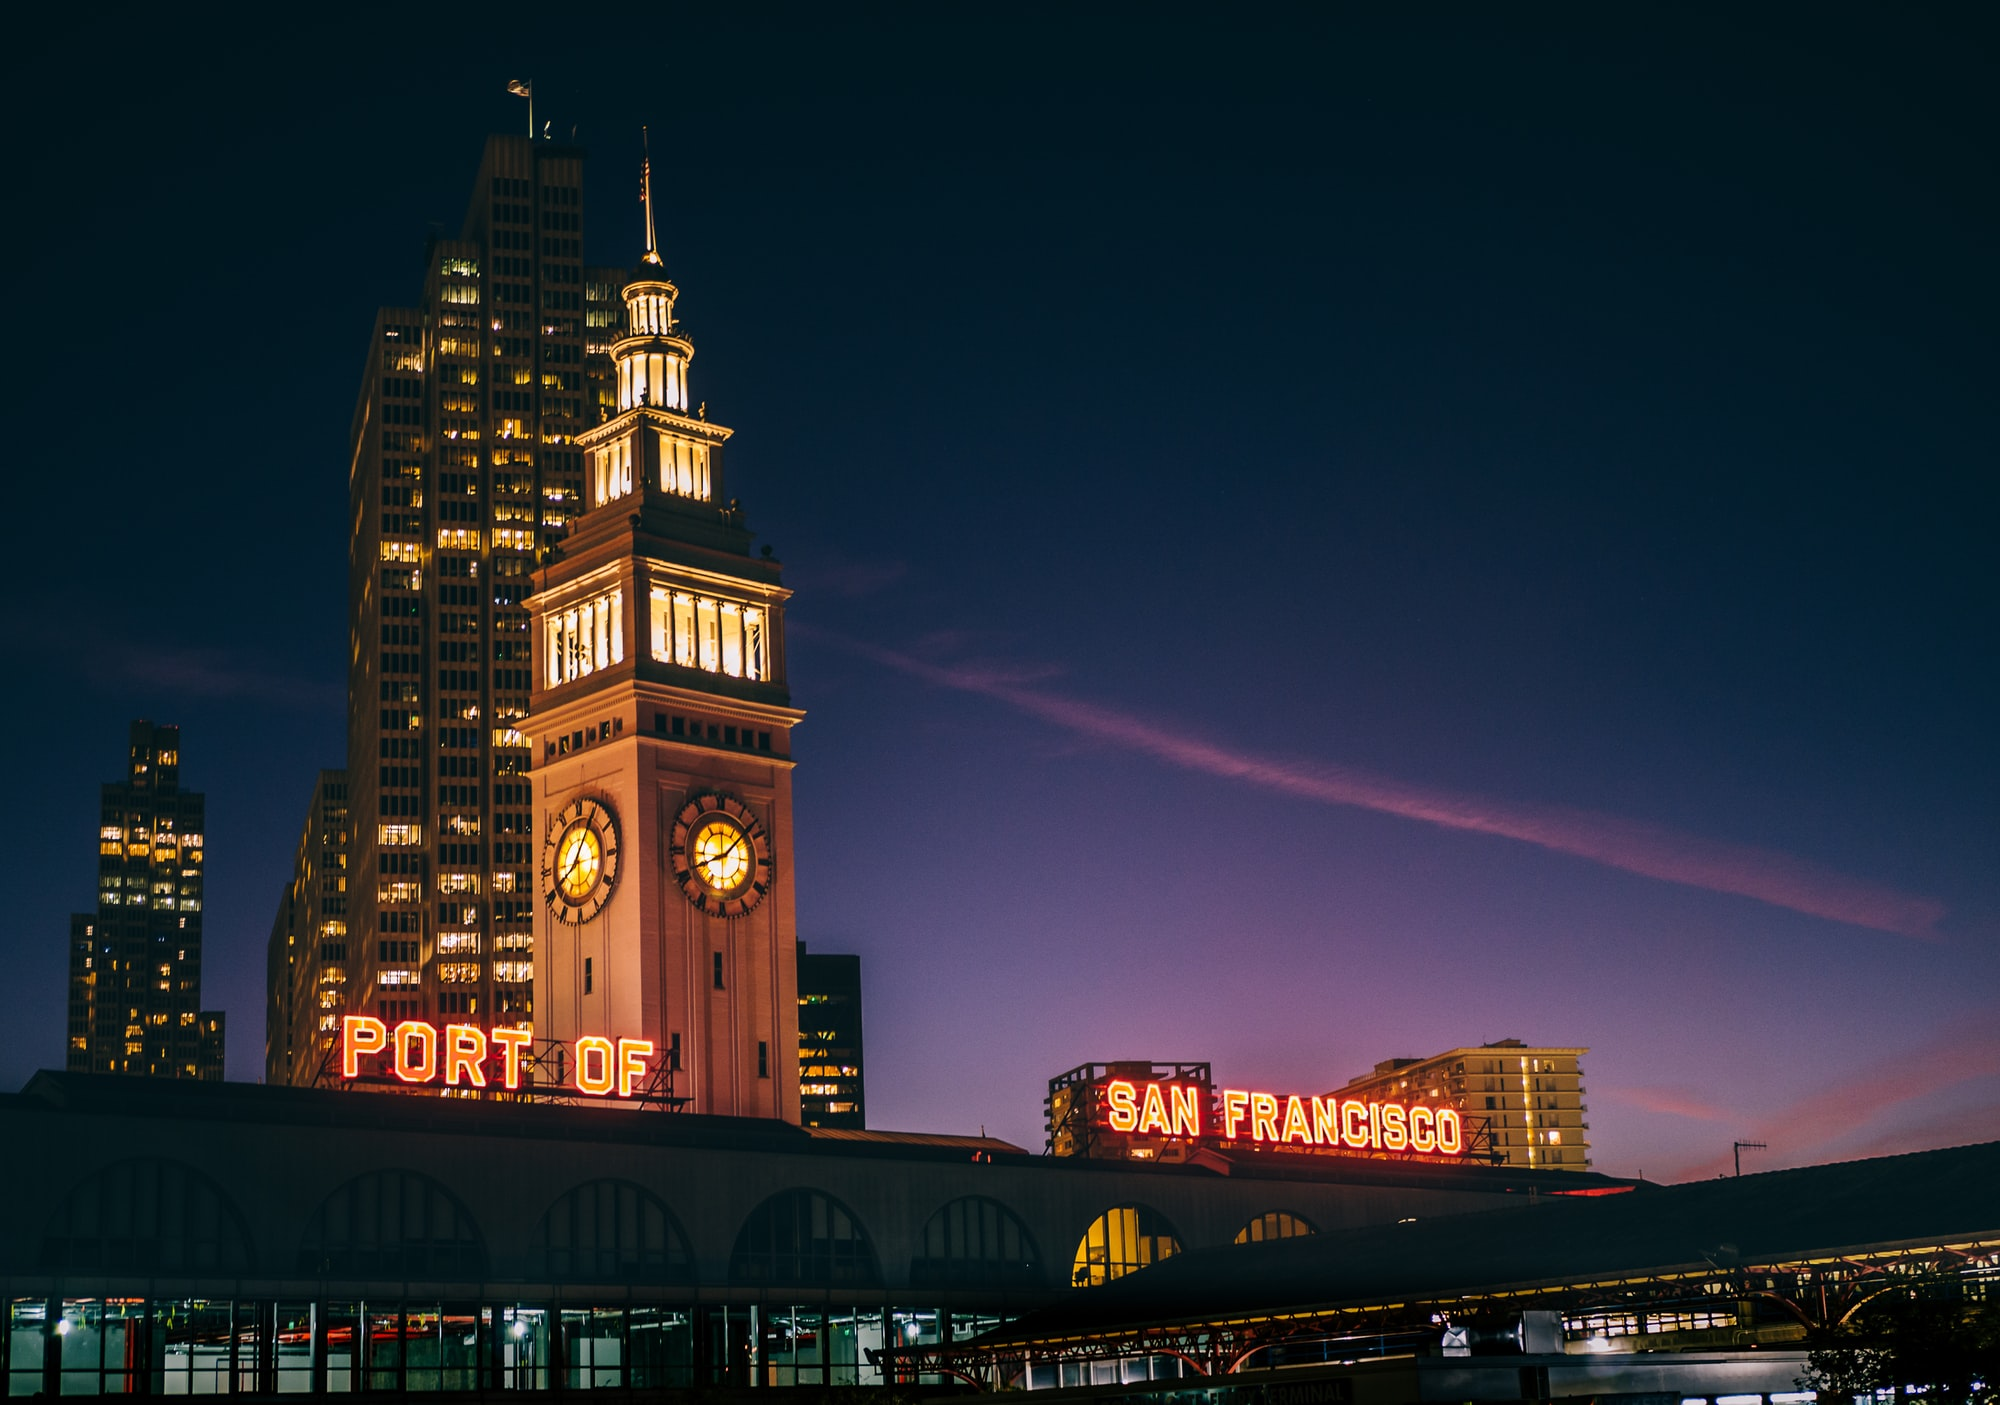 Image of the Port of San Francisco from Unsplash